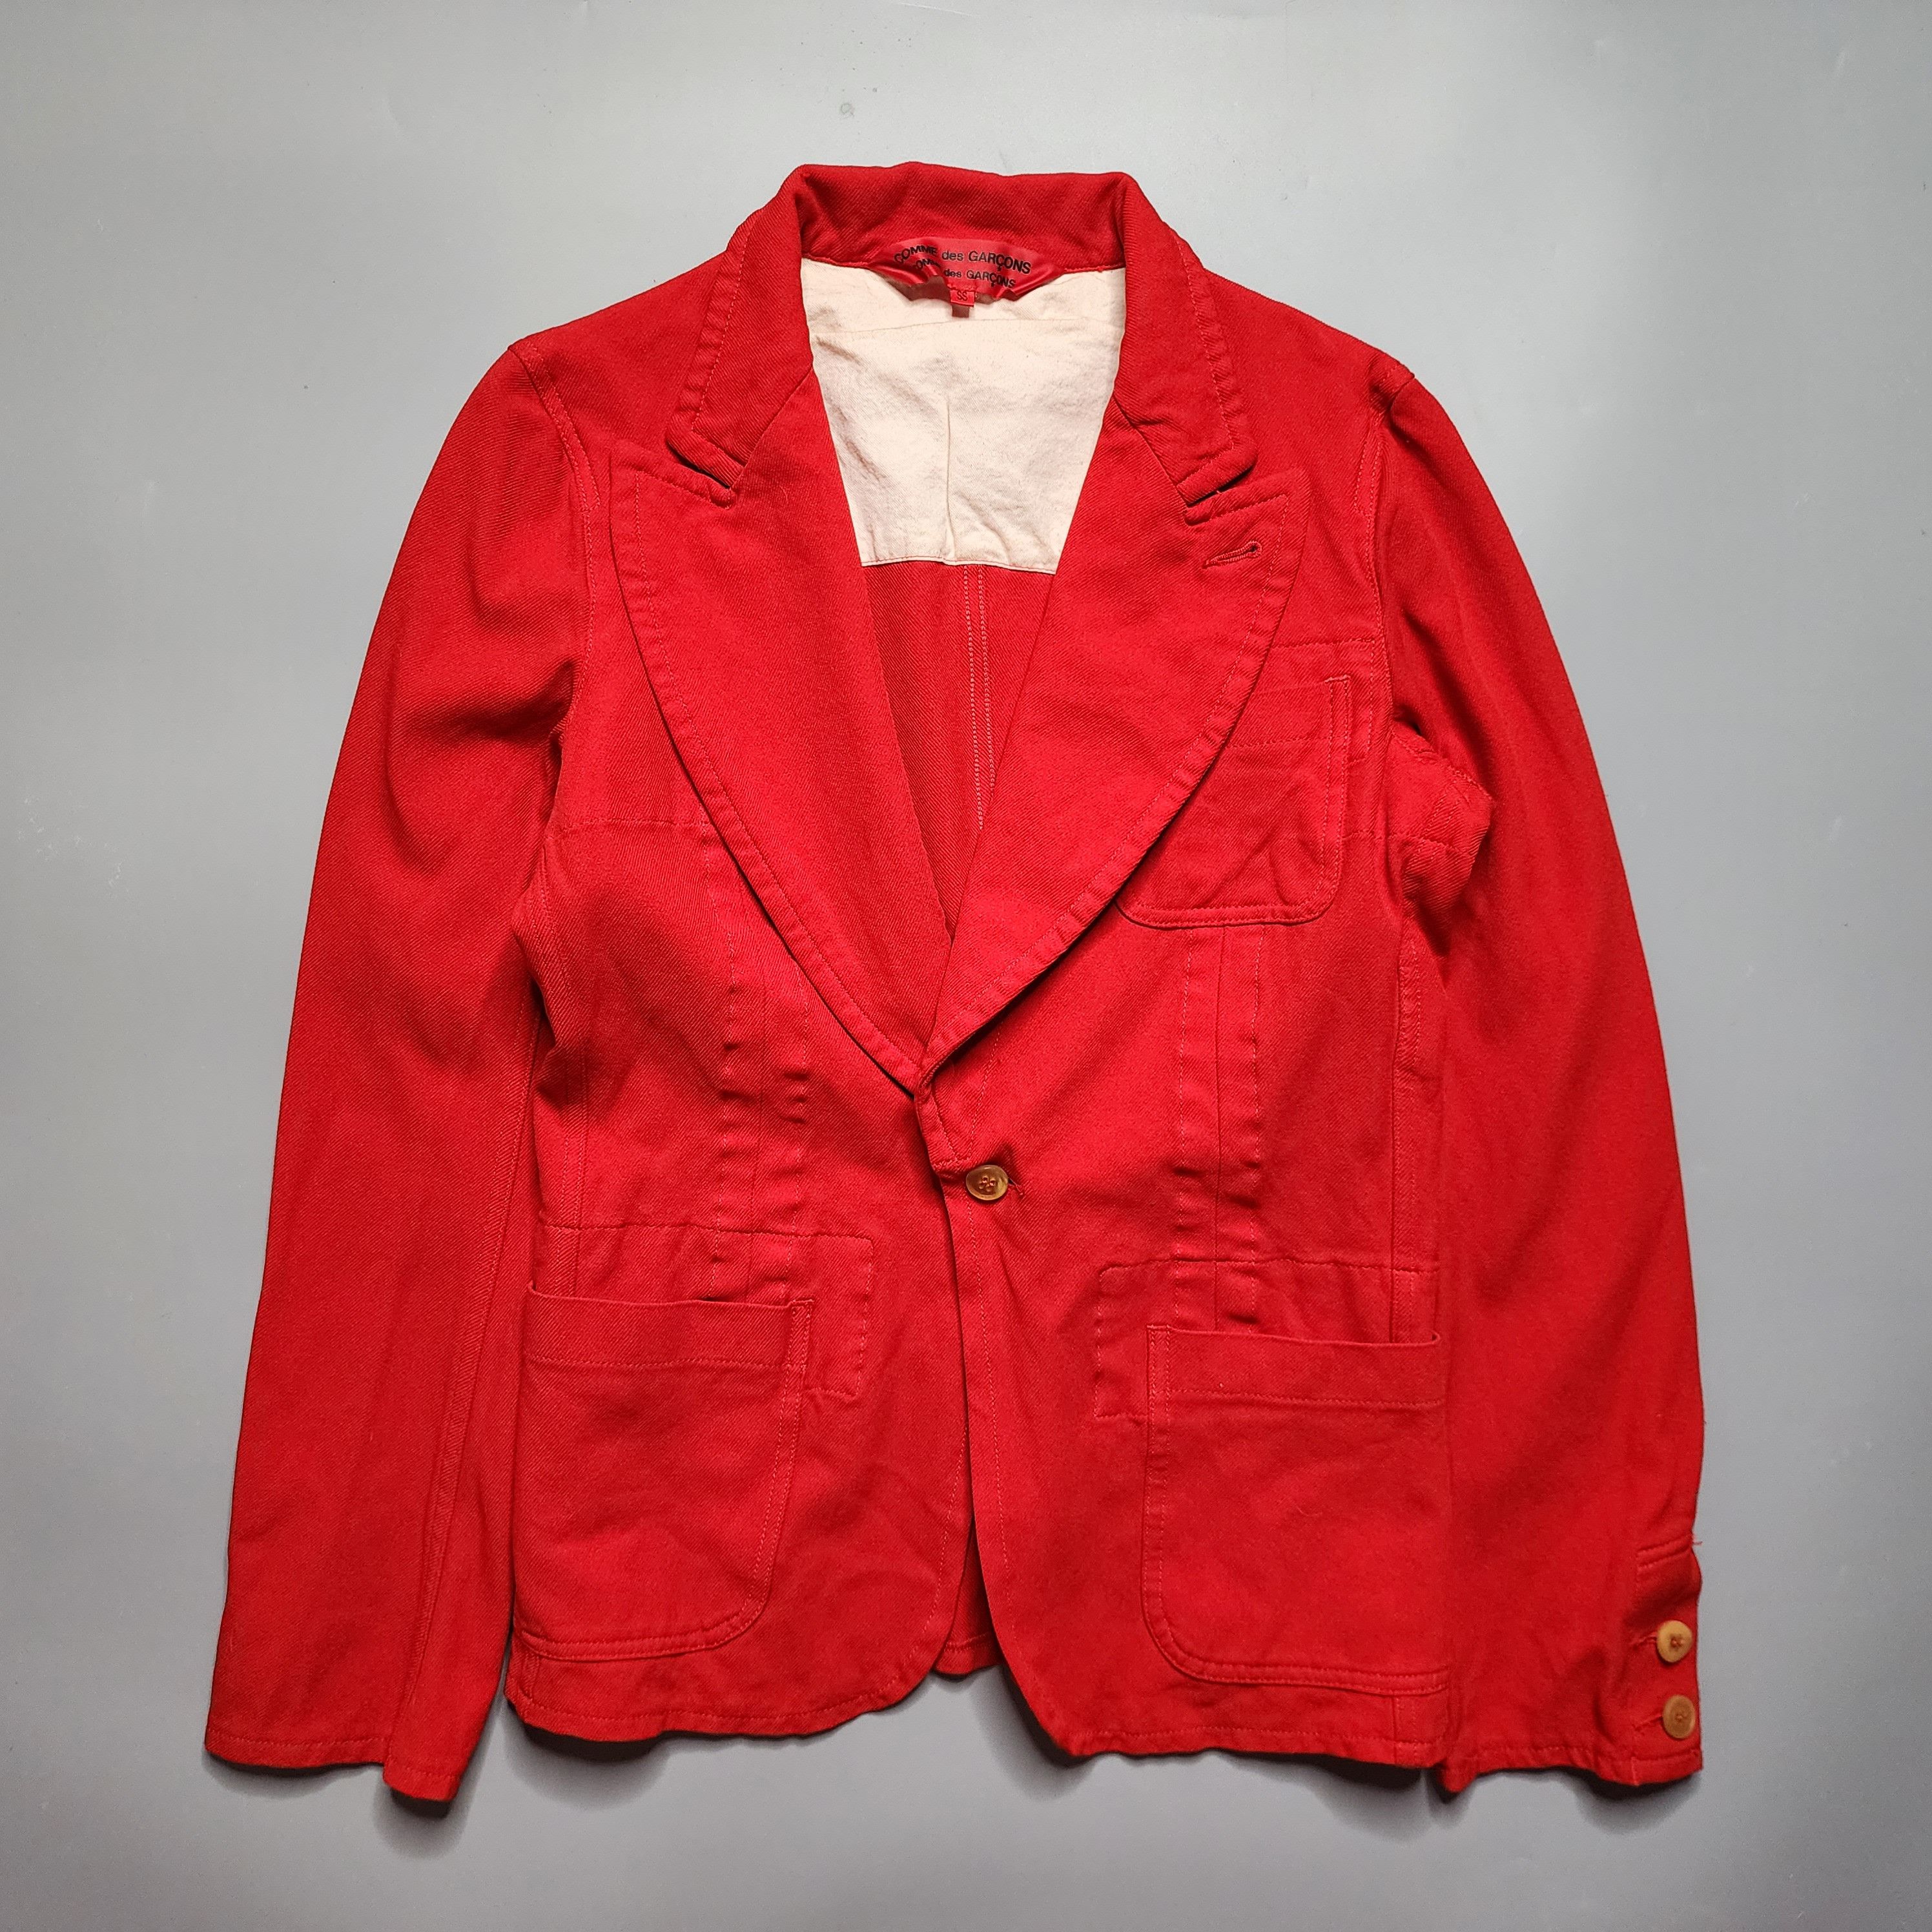 Comme Des Garcons - Overdyed Boiled Polyester Blazer Jacket - 1